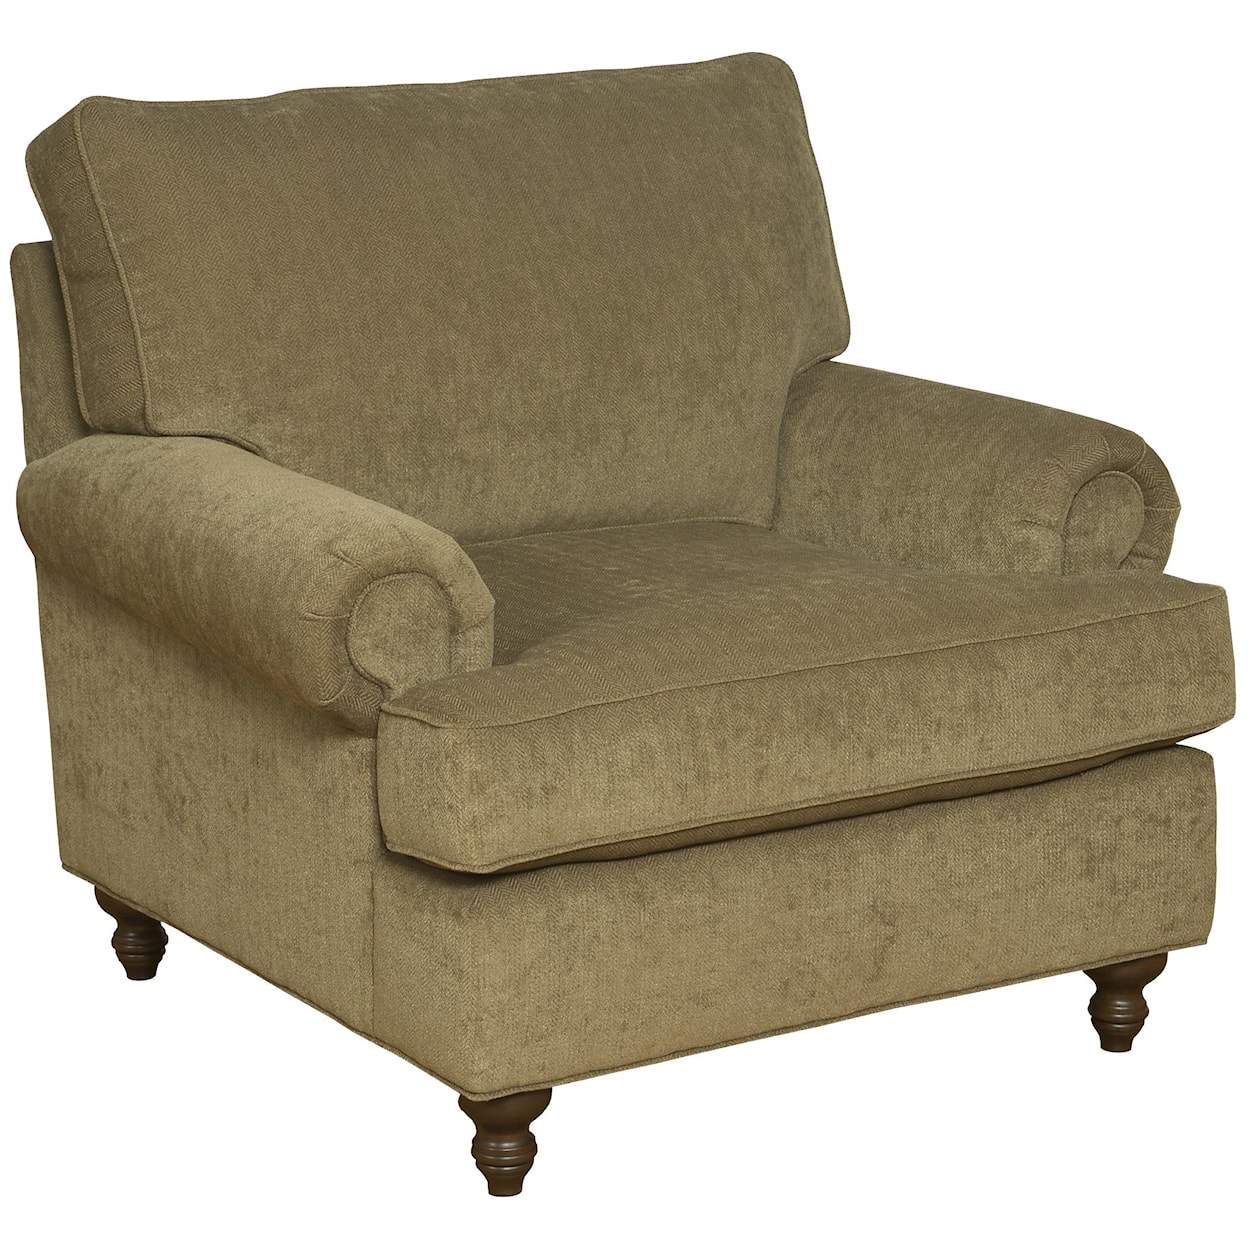 King Hickory Chatham Chair